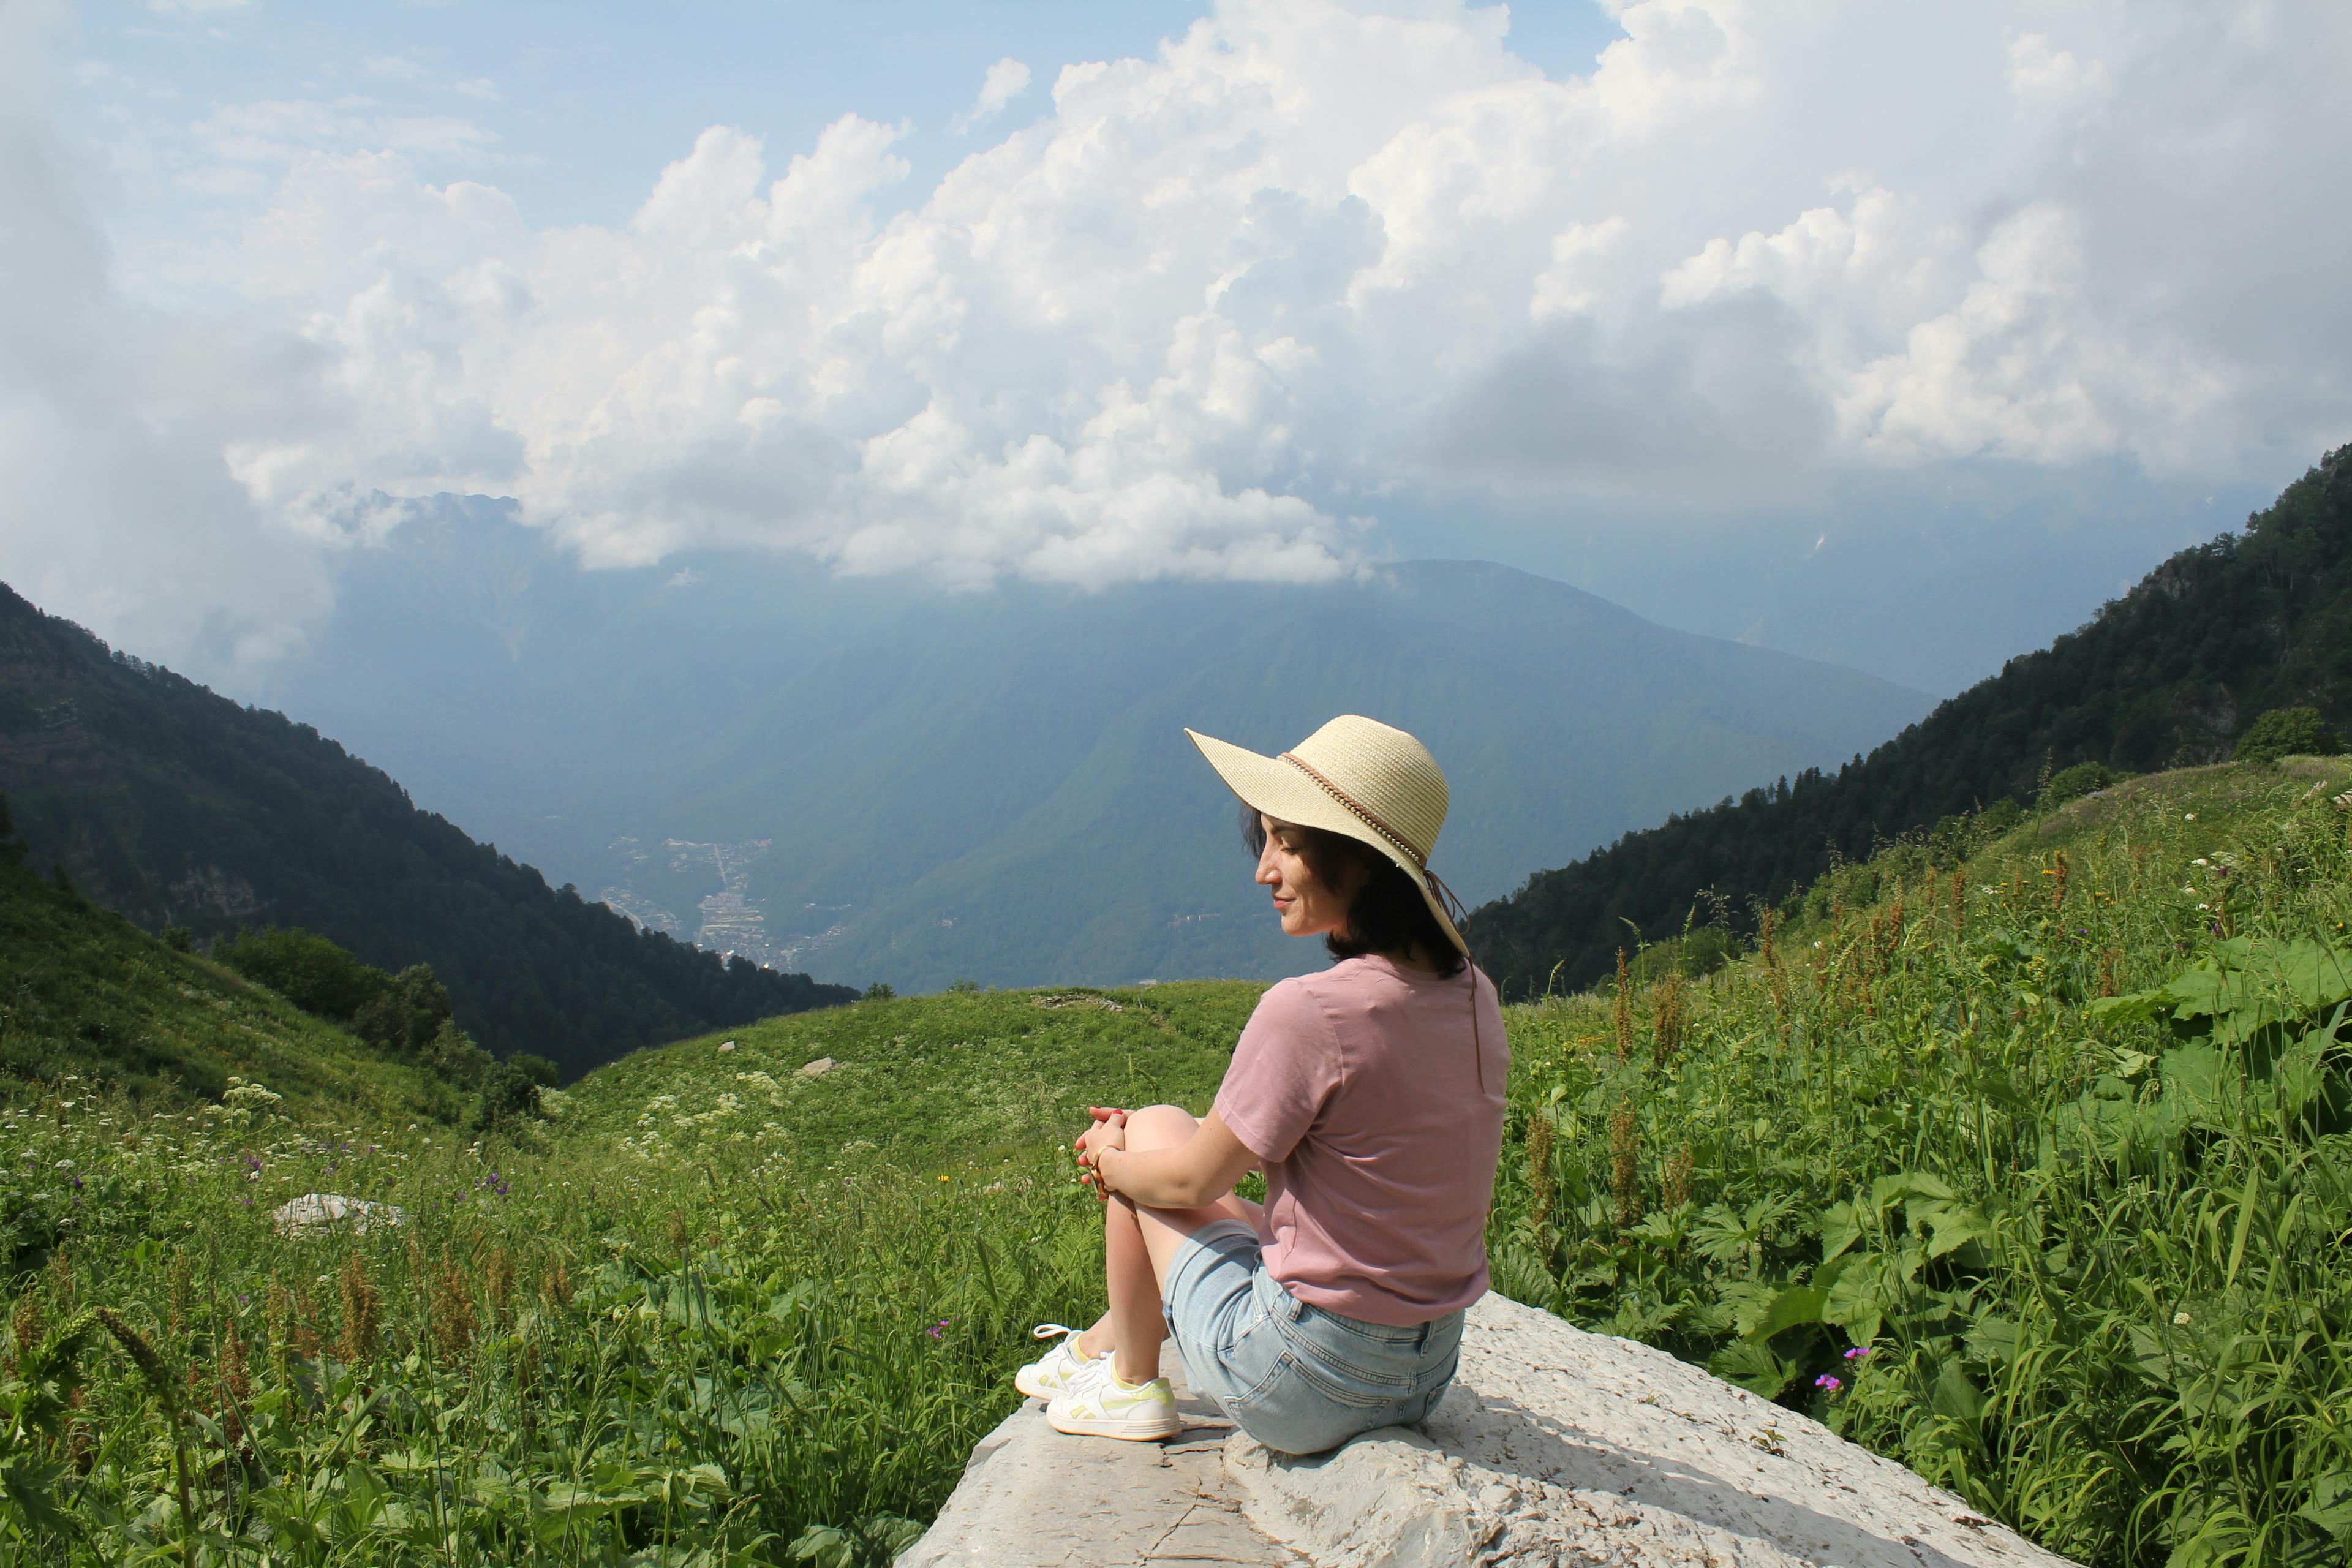 The woman is sitting on the rock with her eyes closed and surrounded by mountains